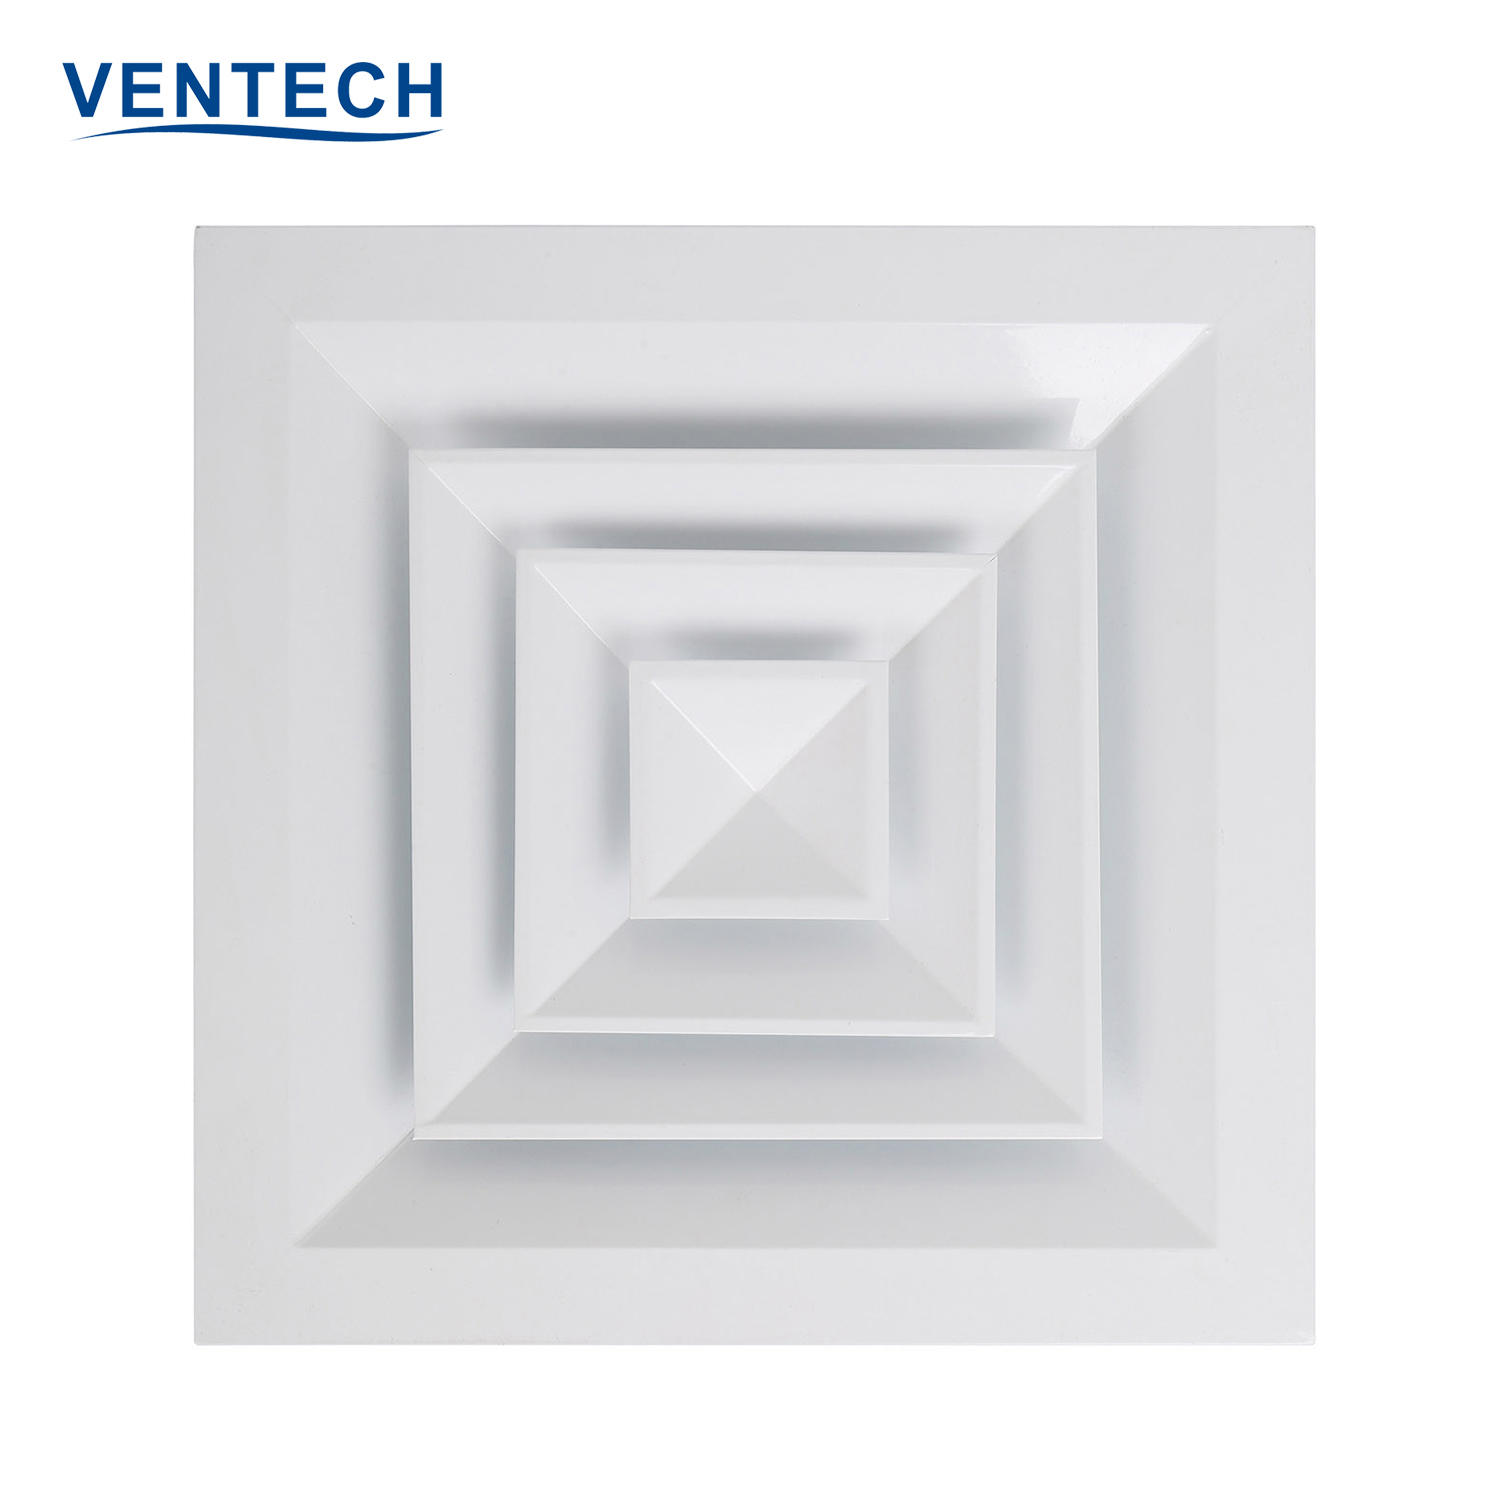 HVAC Air Ventliation Conditioning Supply Ceiling 4 Way Vent Square Ceiling Diffuser